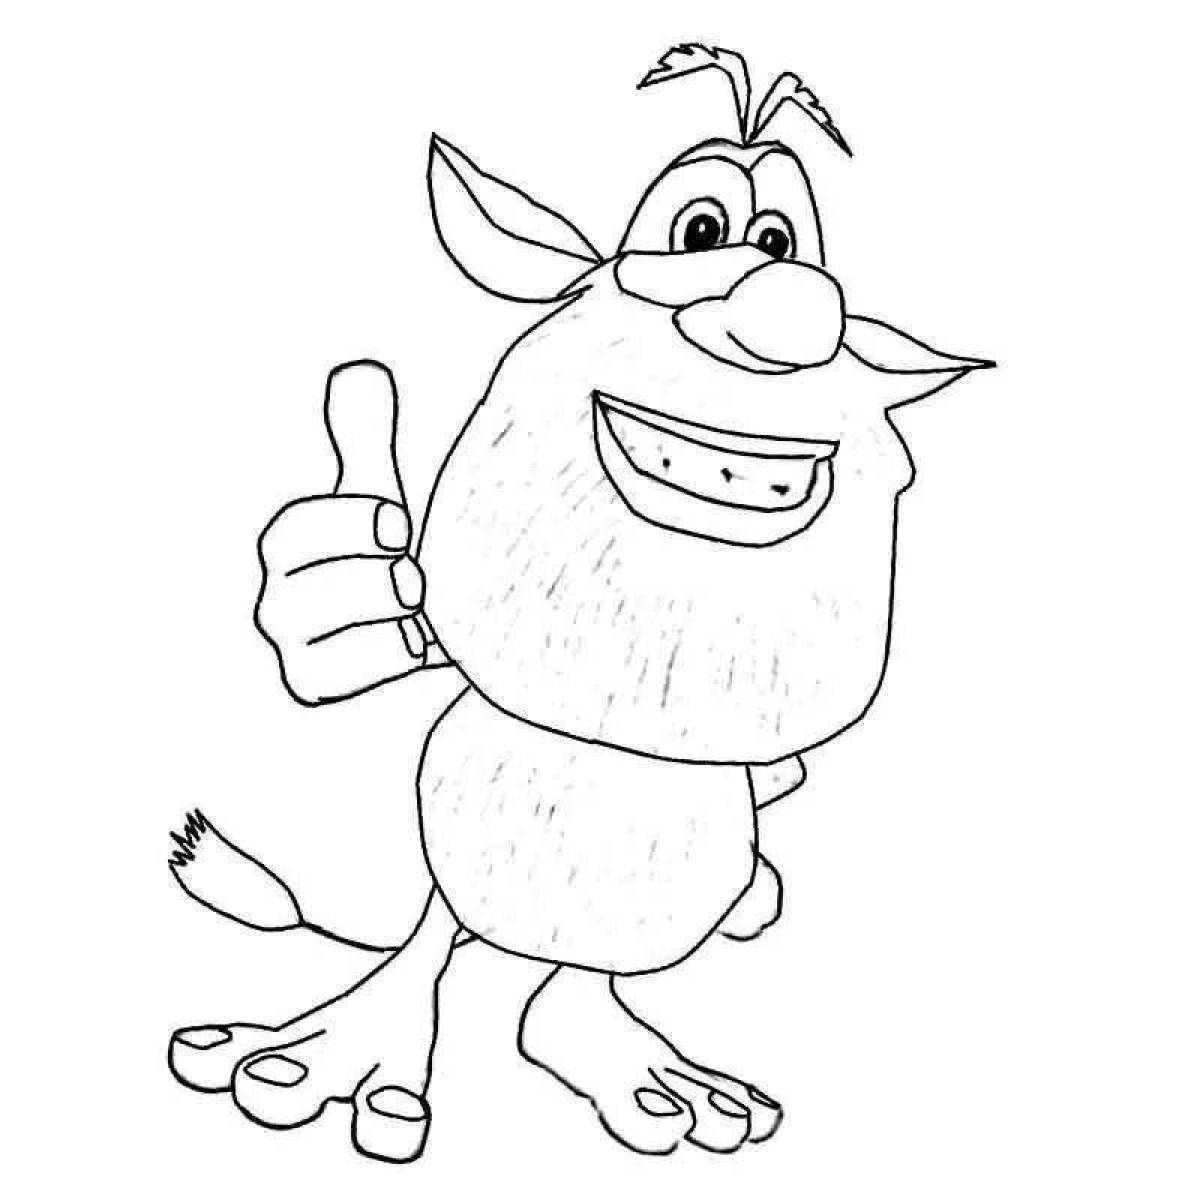 Brownie's happy date coloring page